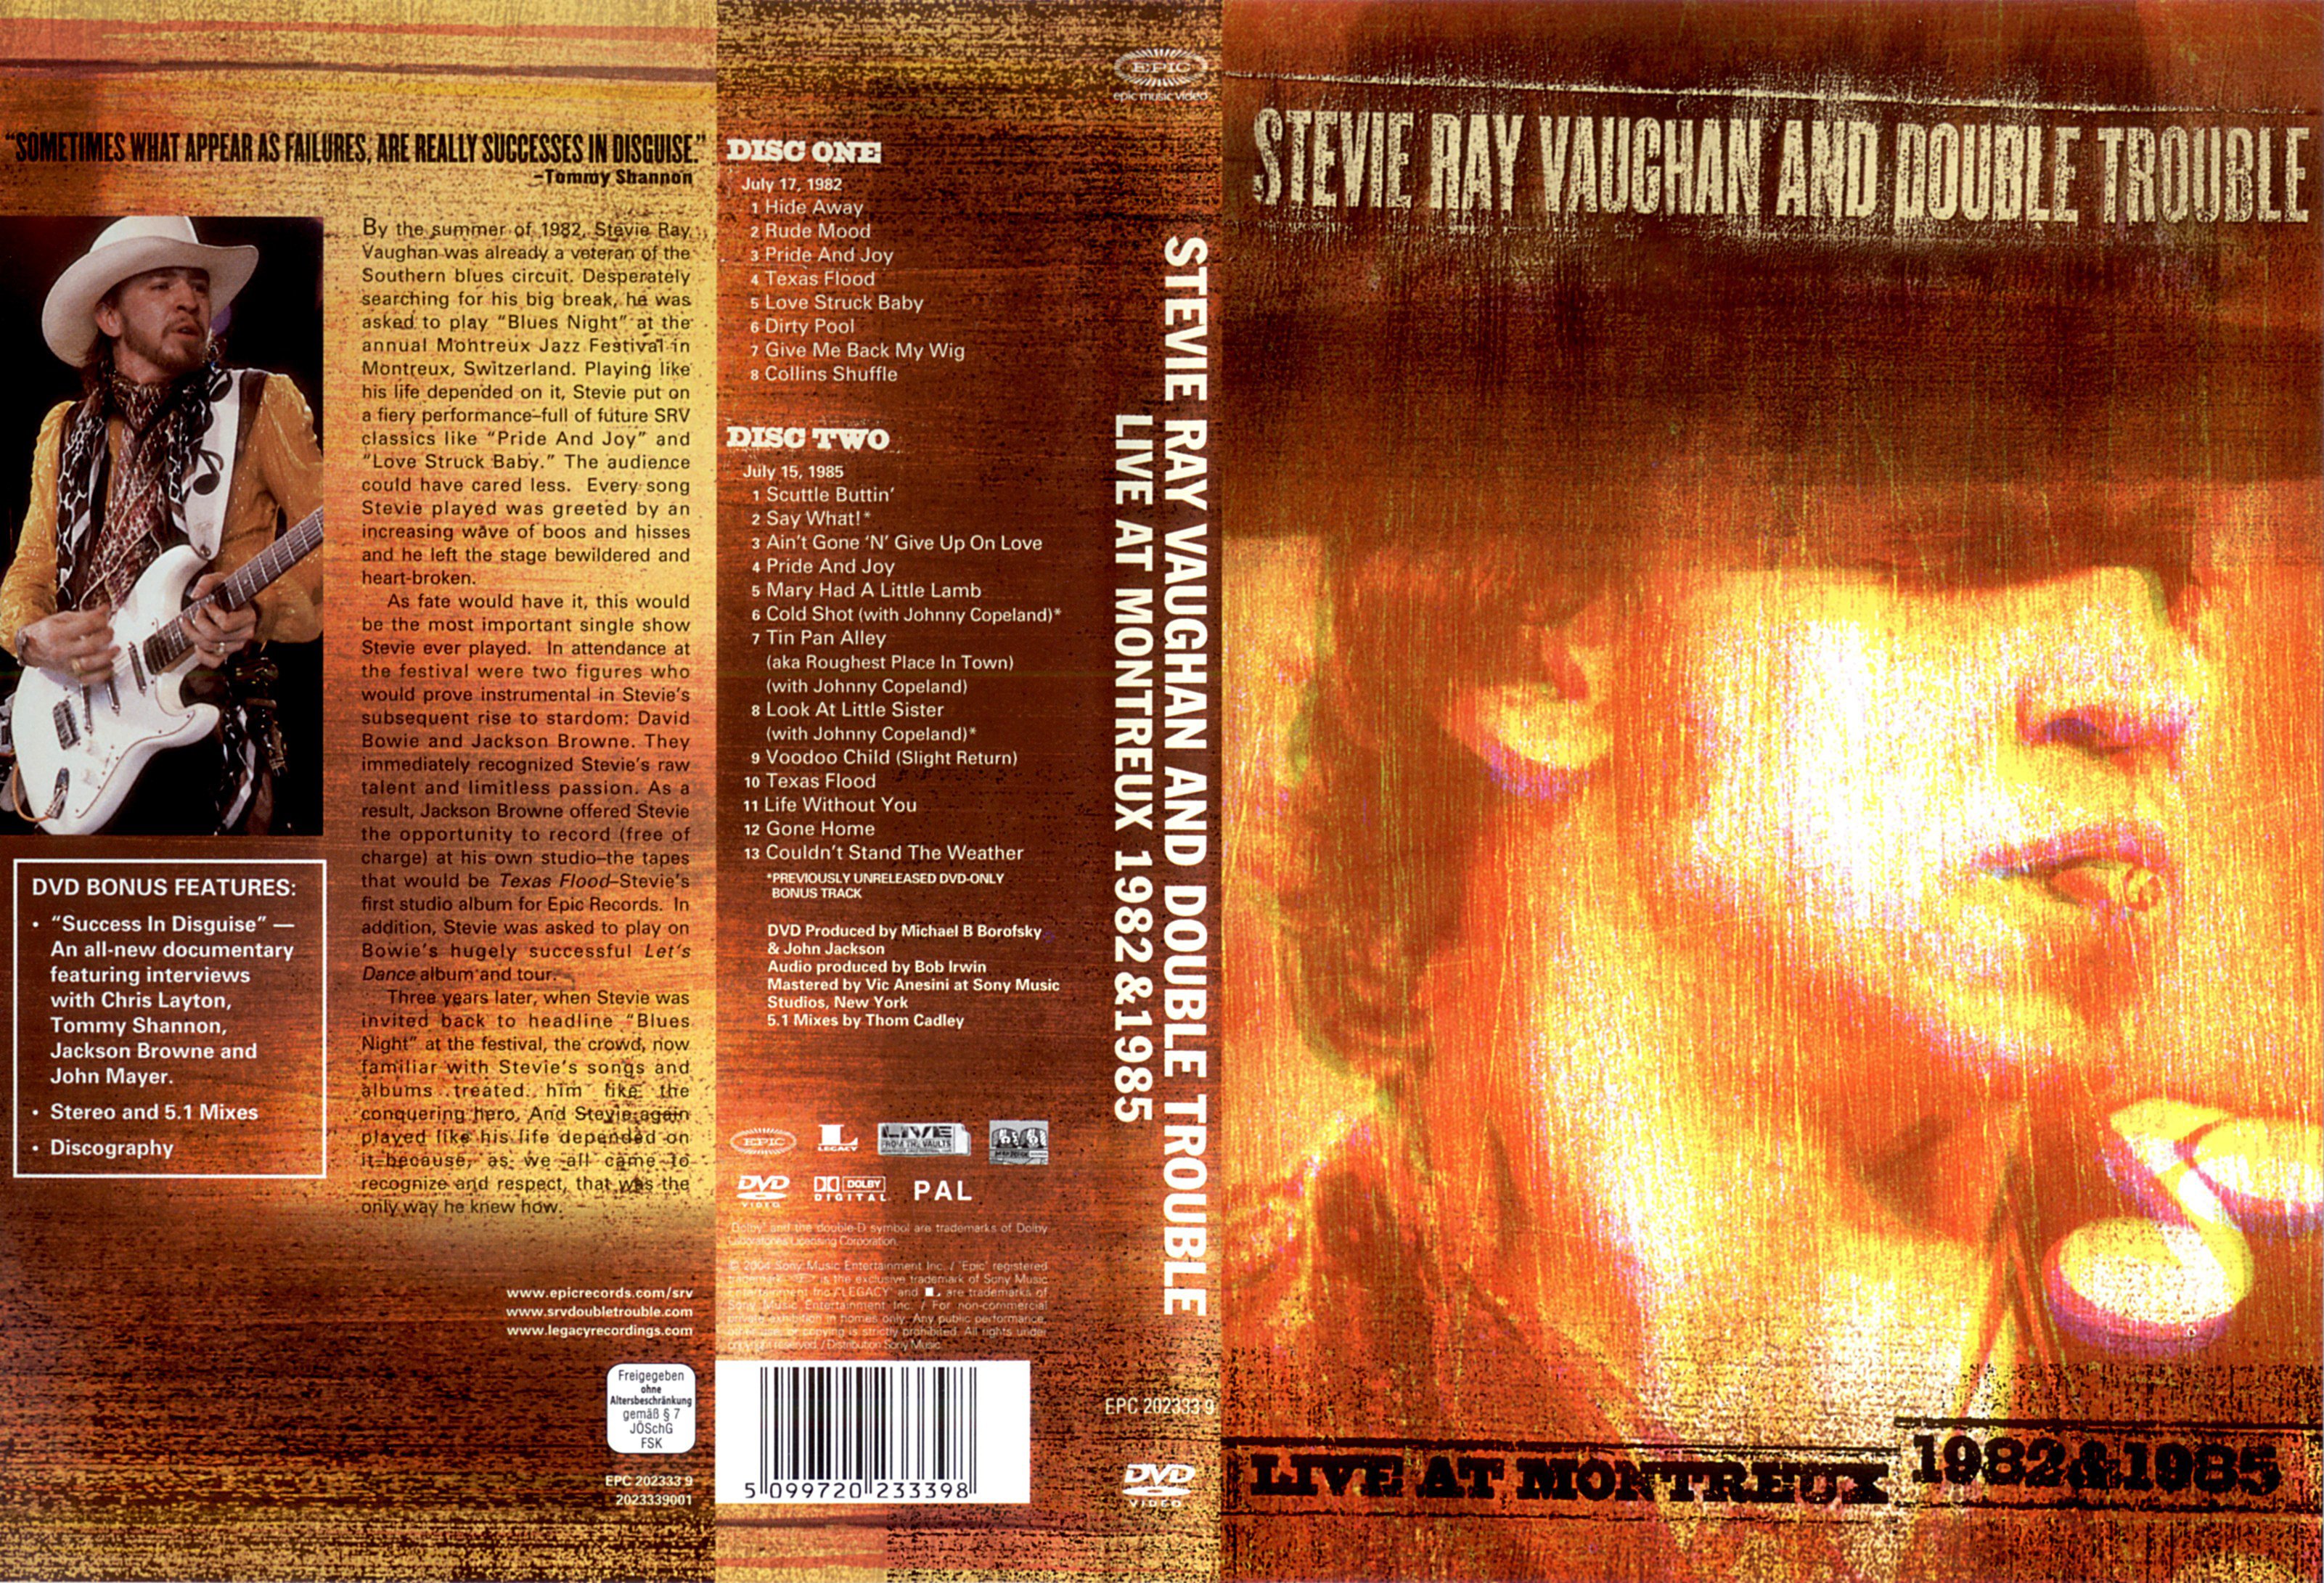 Jaquette DVD Stevie Ray Vaughan and double trouble - Live at Montreux 1982-1985